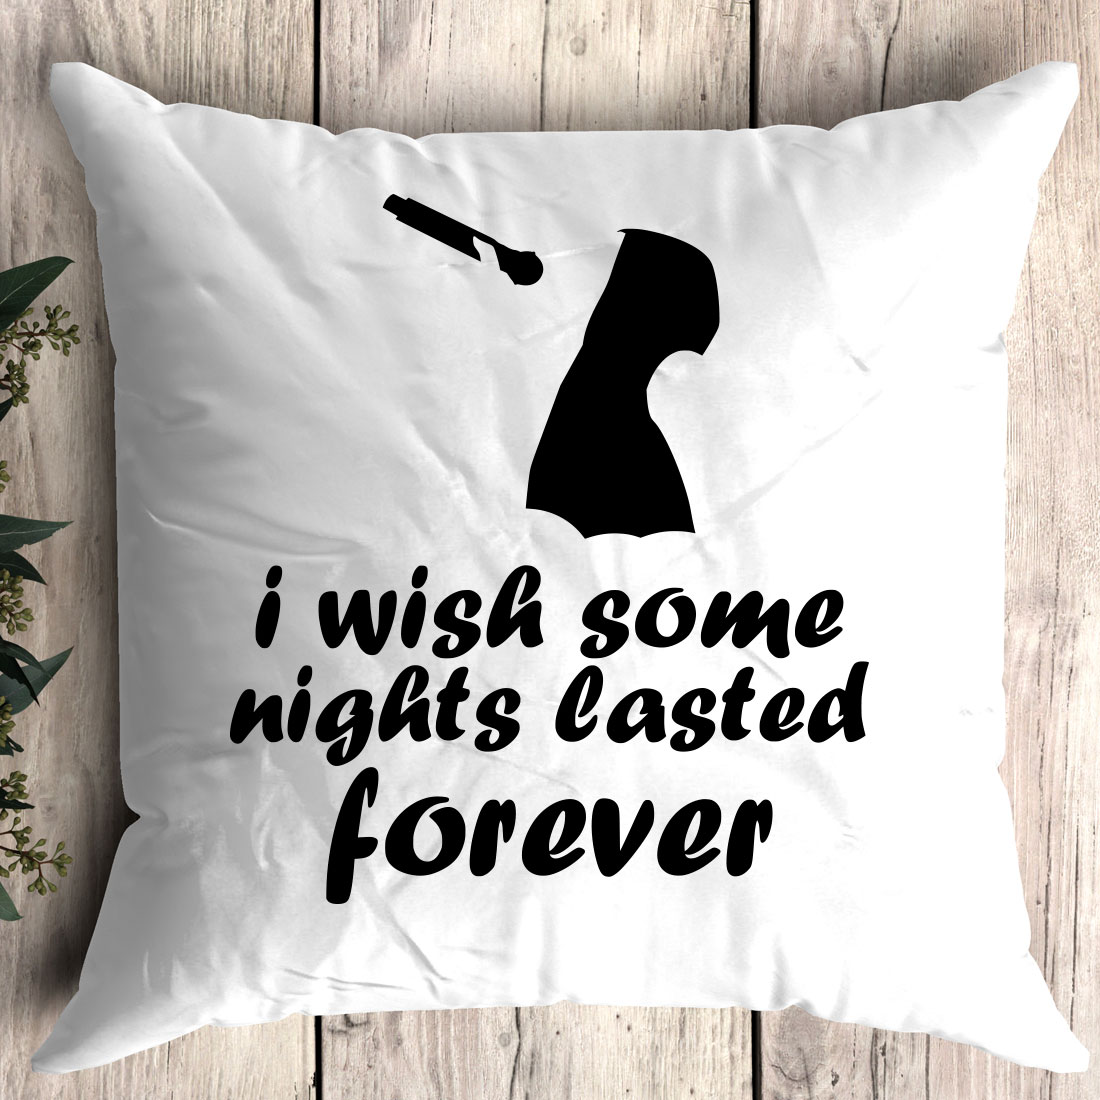 Pillow that says i wish some nights tasted forever.